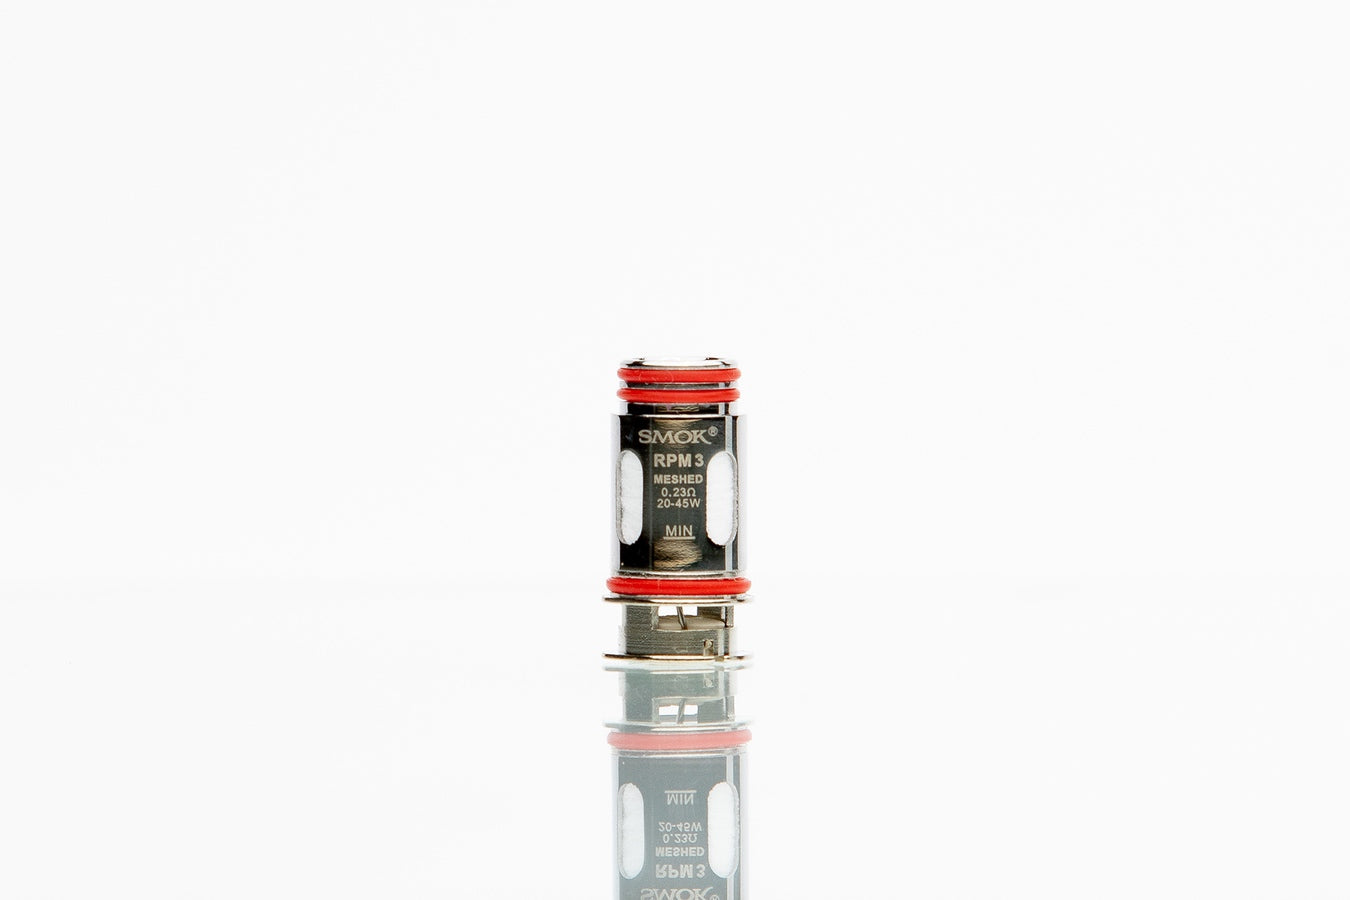 RPM3 coil for SMOK Nord 5 vape device